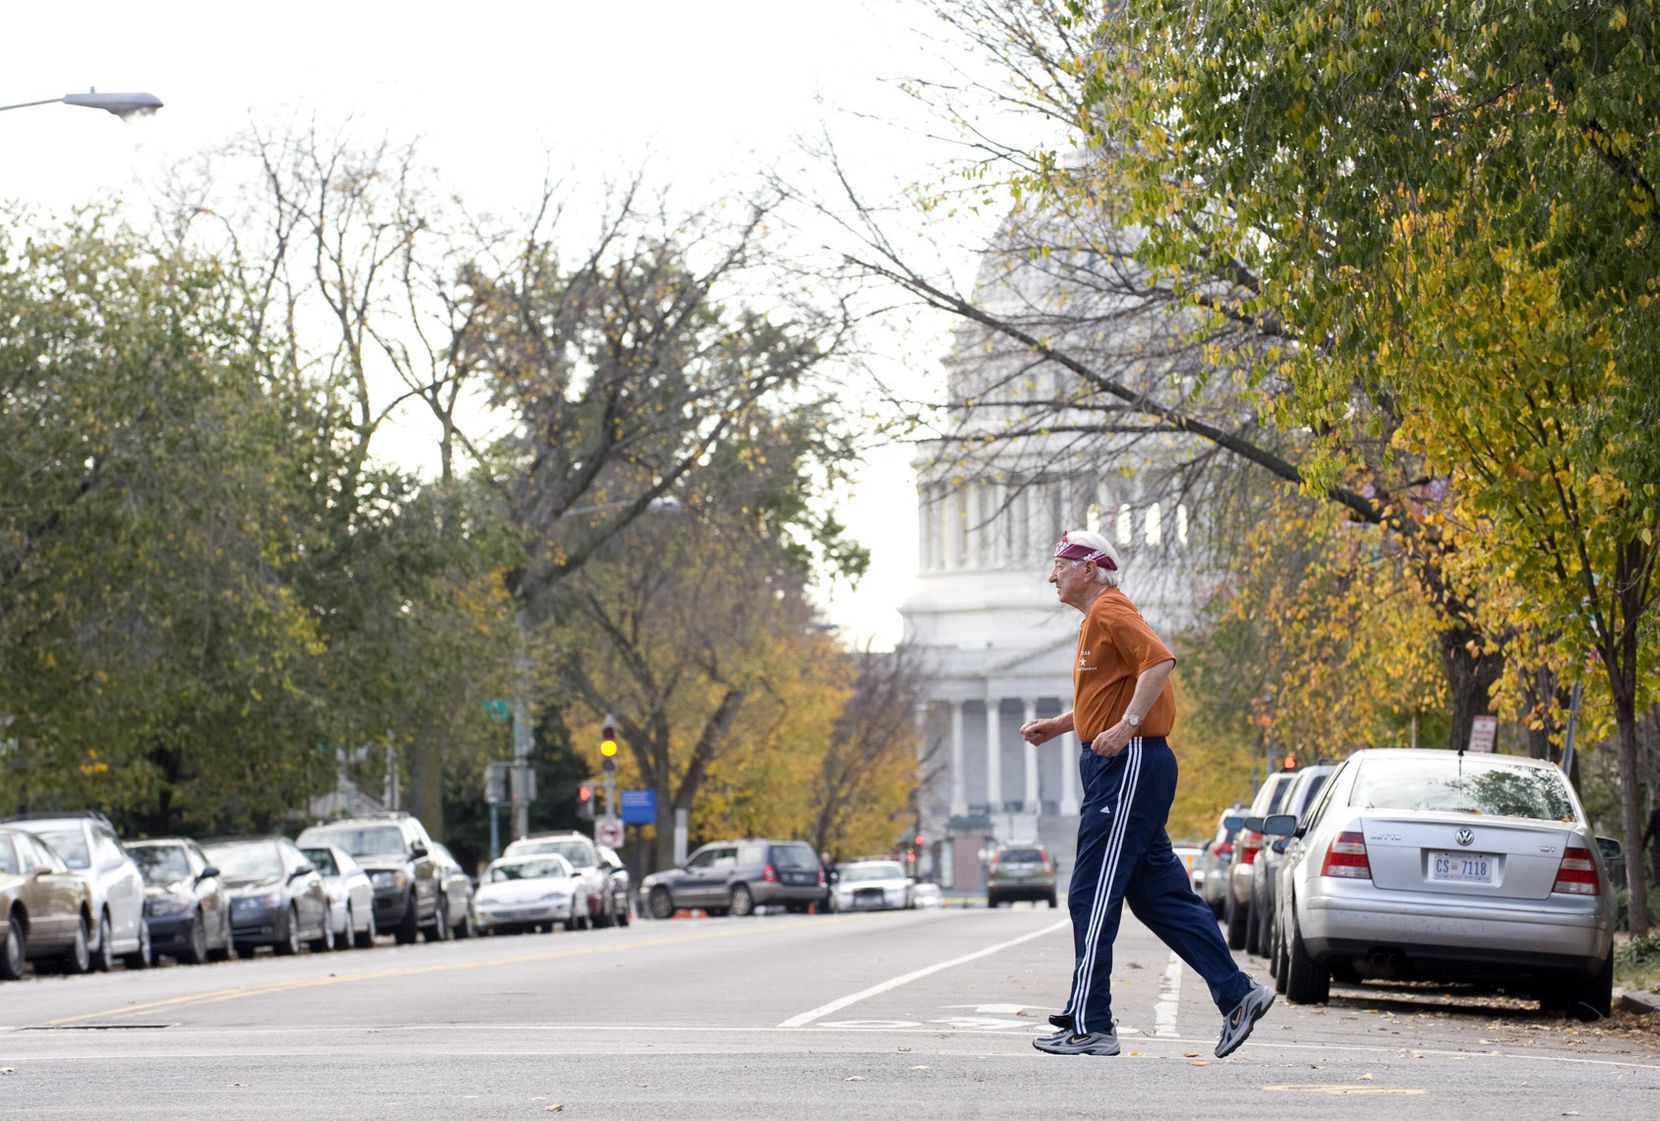 Rep. Ralph Hall, age 86, took his more than 3-mile daily jog from his house on Capitol Hill...